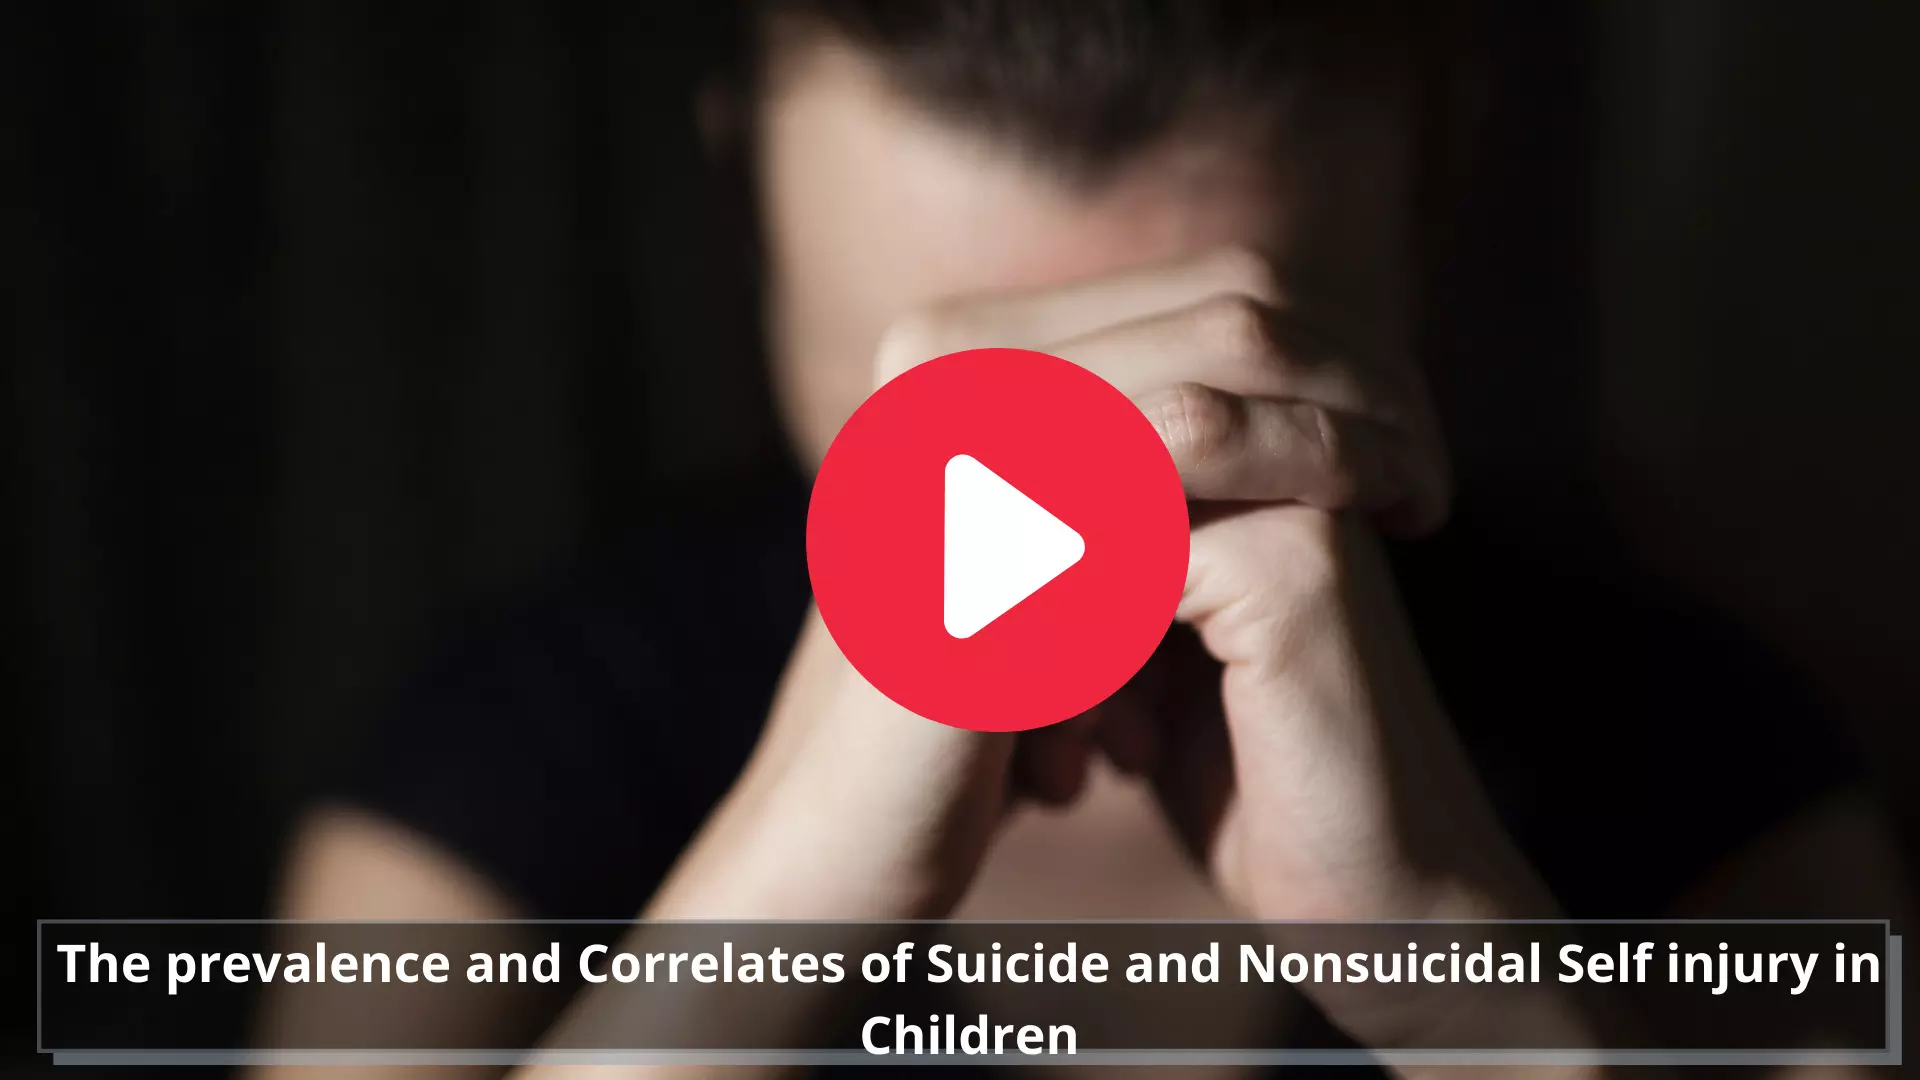 The prevalence and Correlates of Suicide and Nonsuicidal Self injury in Children